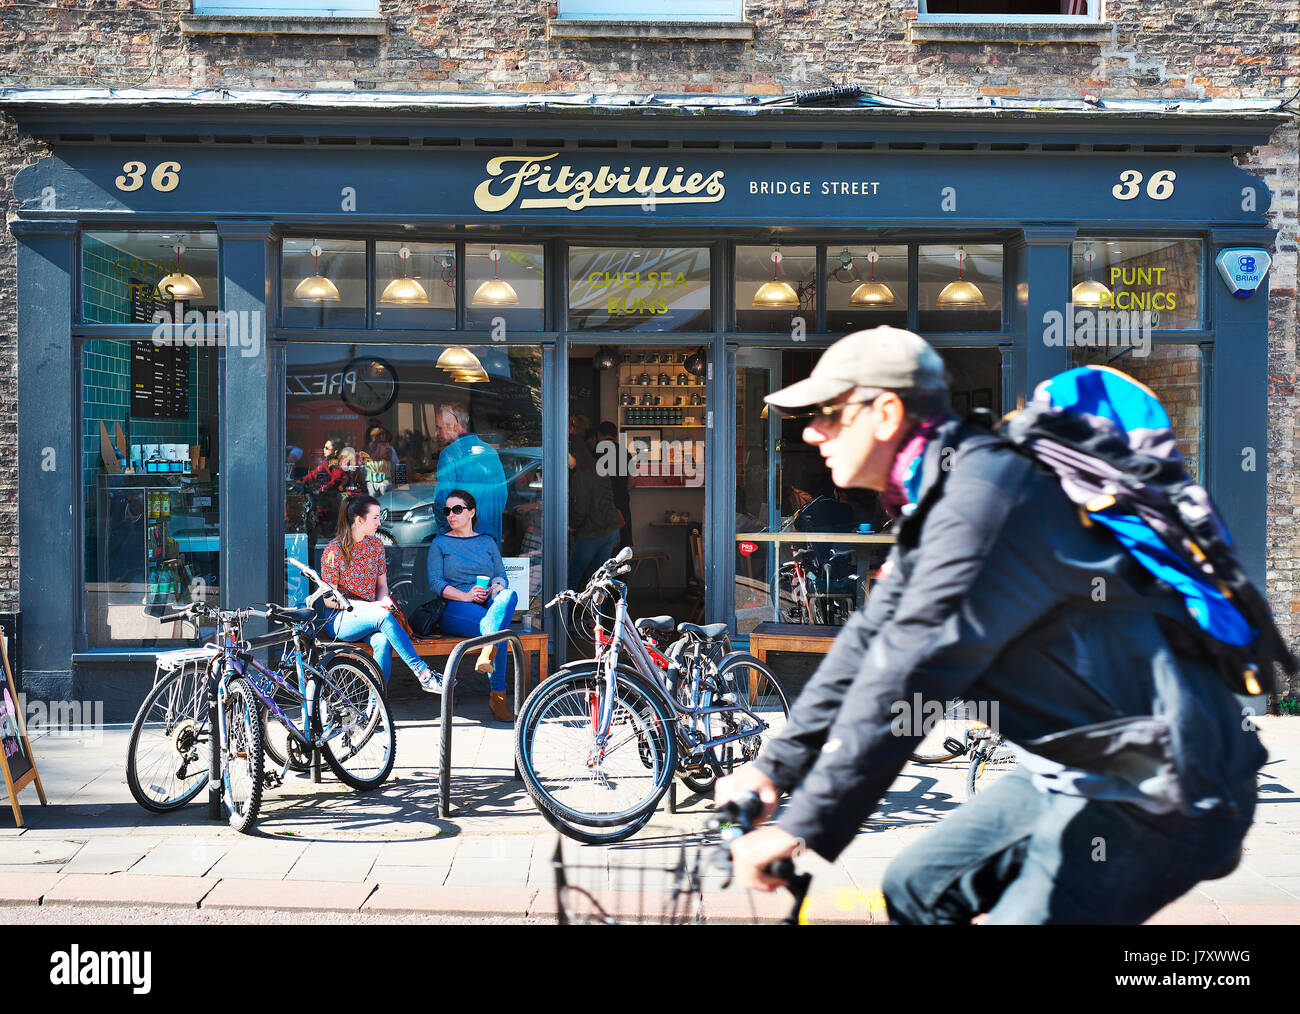 Sunday lifestyle in Cambridge, UK. Cyclist rides past a Cambridge institution of Fitzbilllies cafe in city while people sit drinking coffee Stock Photo